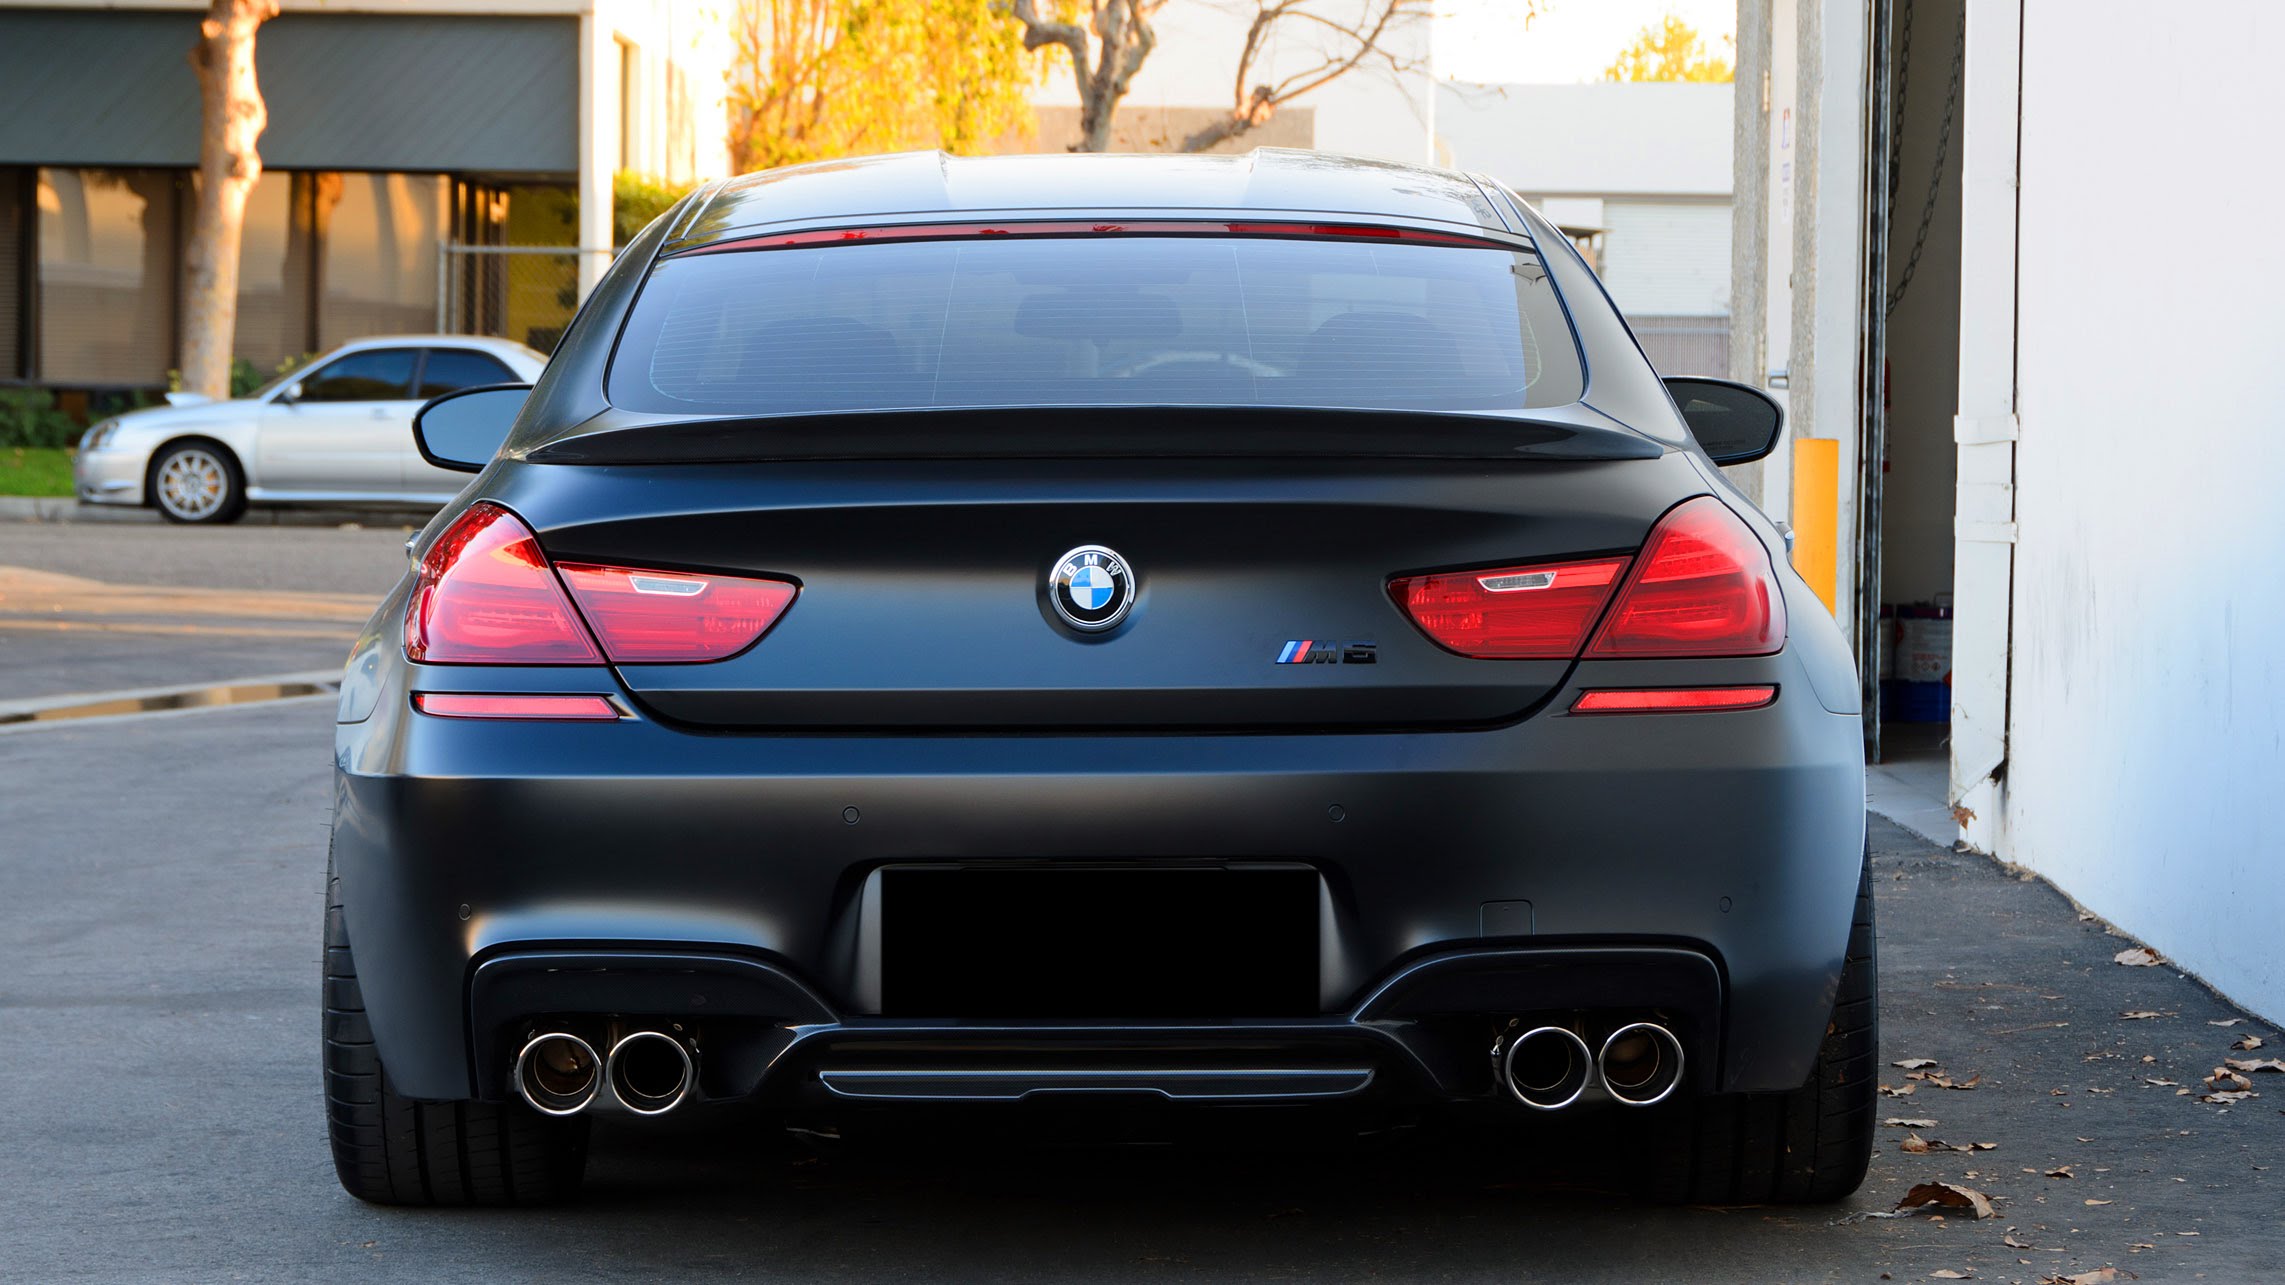 Bmw M6 Wallpapers Vehicles Hq Bmw M6 Pictures 4k Wallpapers 2019